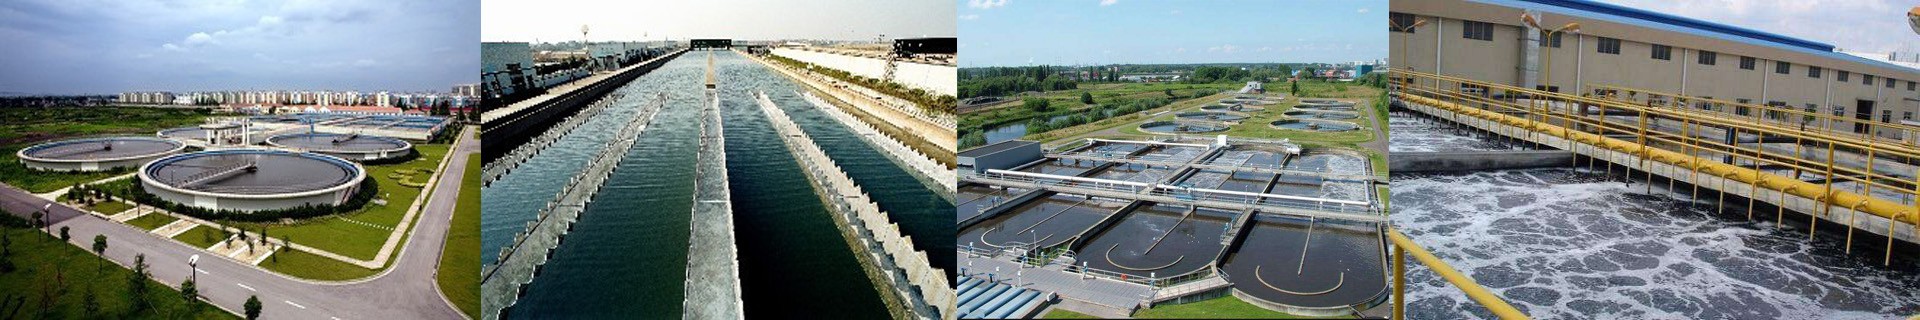 Raw water treatment project and wastewater treatment project